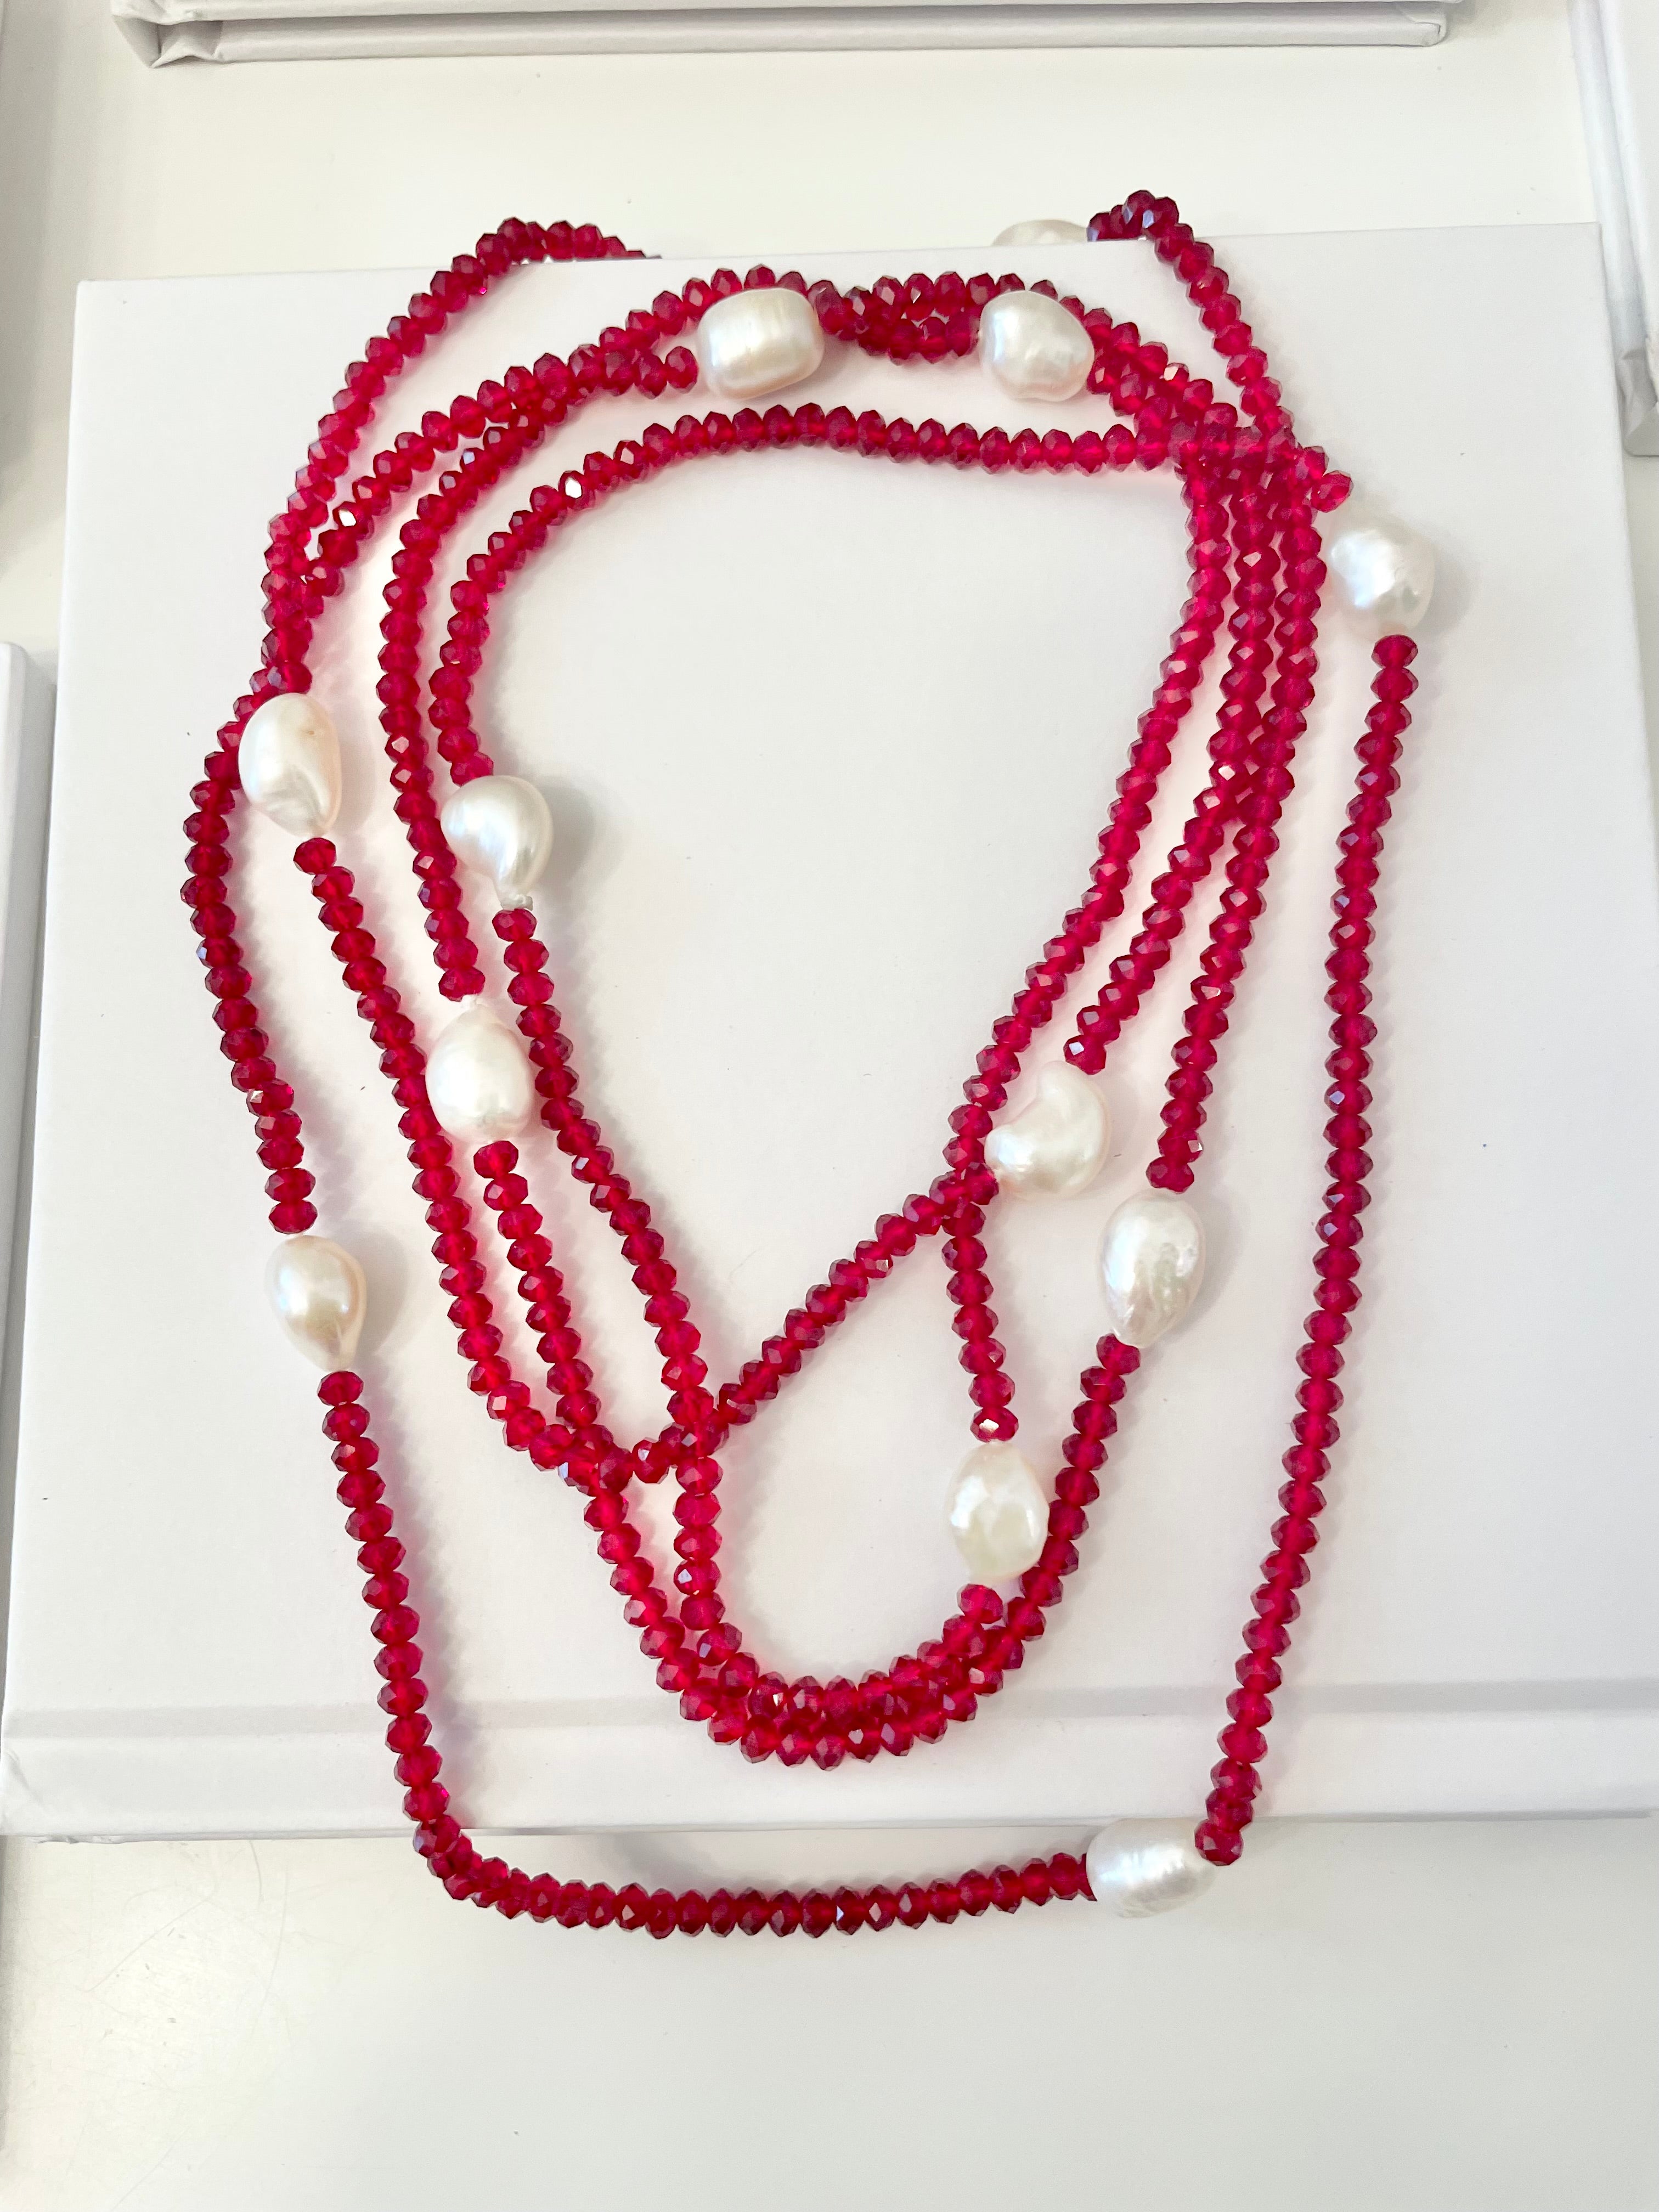 The ladies of Madison Ave adore a opera length set of pearls, and crystals.. so elegant